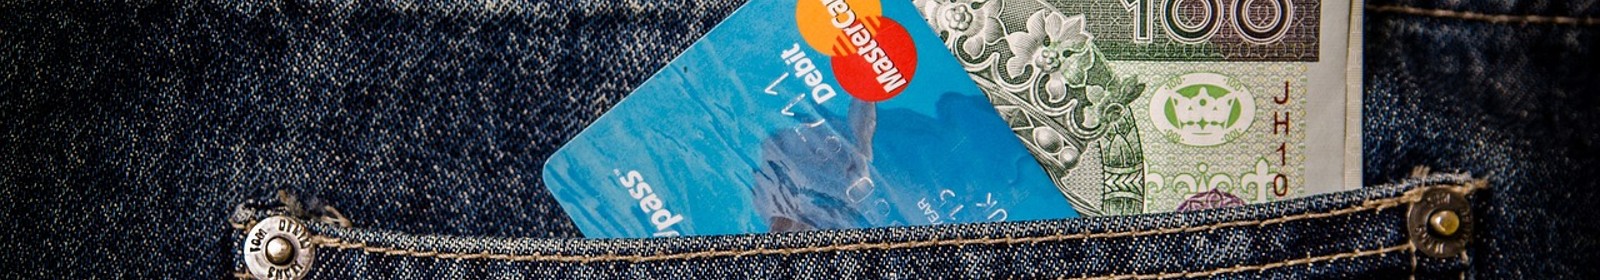 credit card and cash in back pocket of jeans